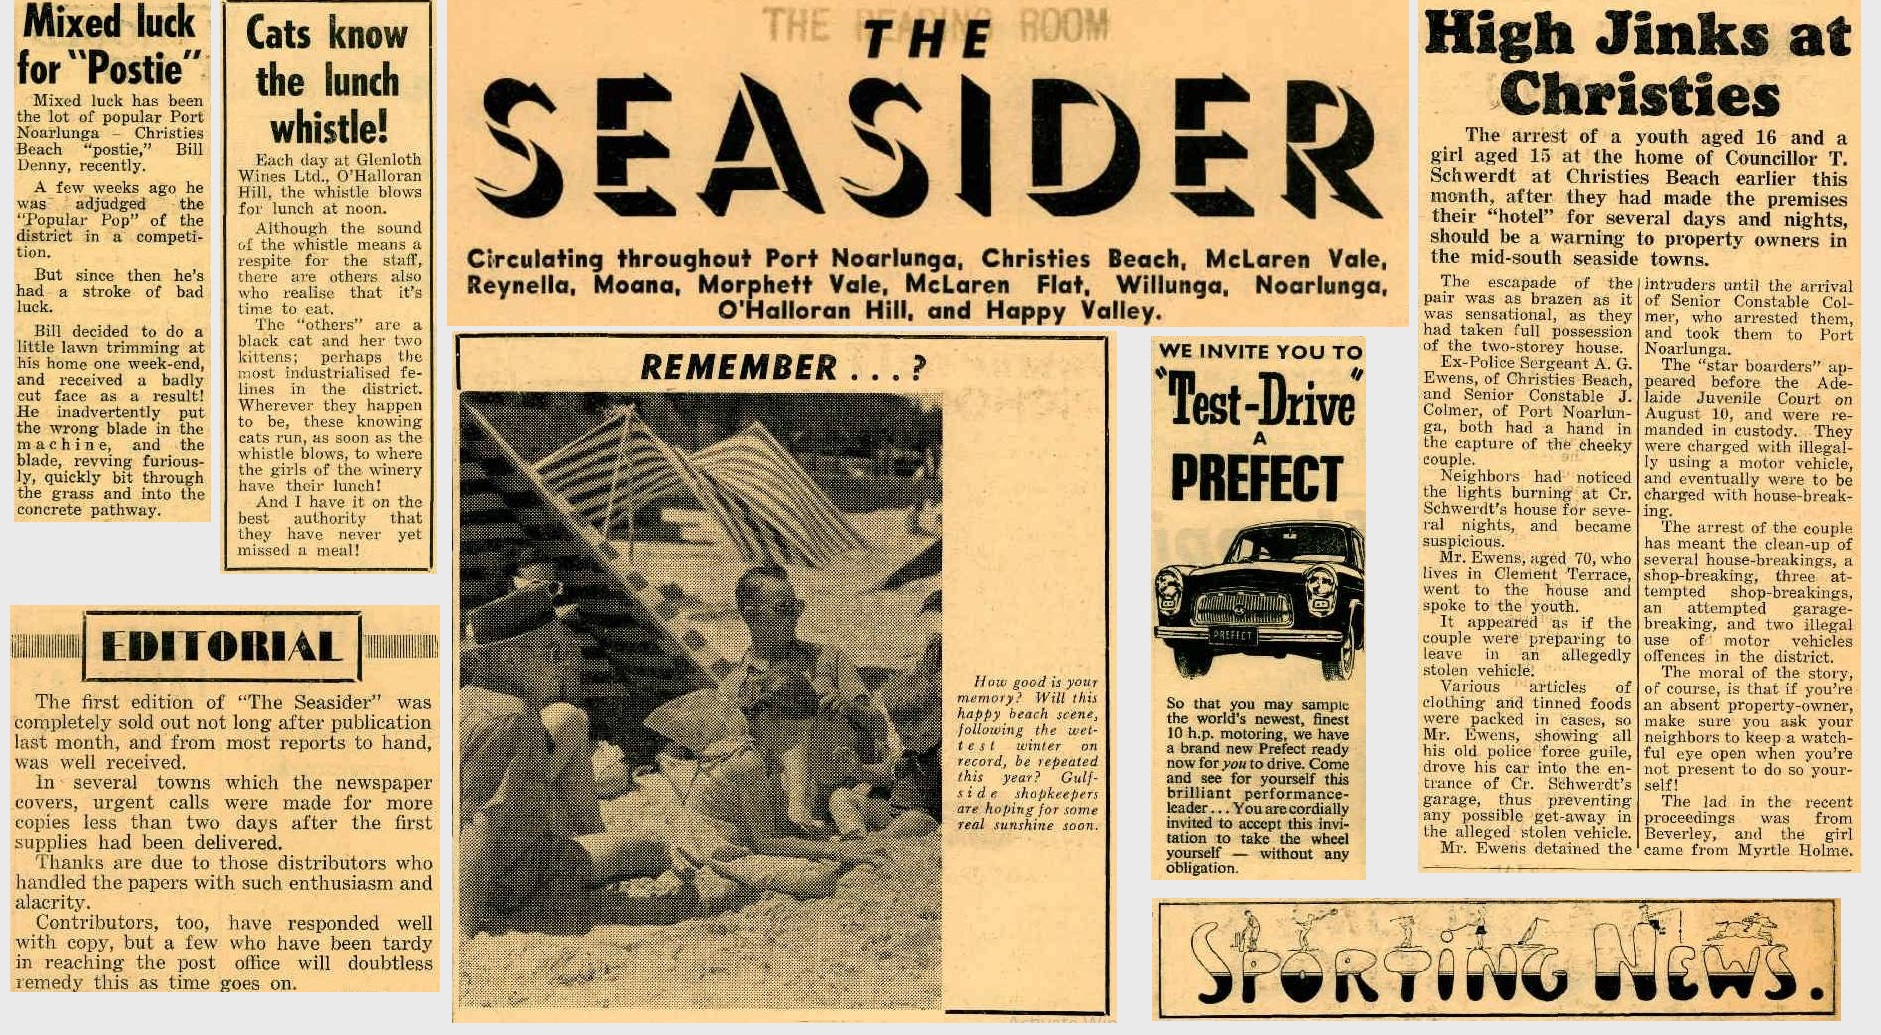 Newspaper clippings from 'The Seasider' showing the newspaper masthead and quirky articles from the first few issues.